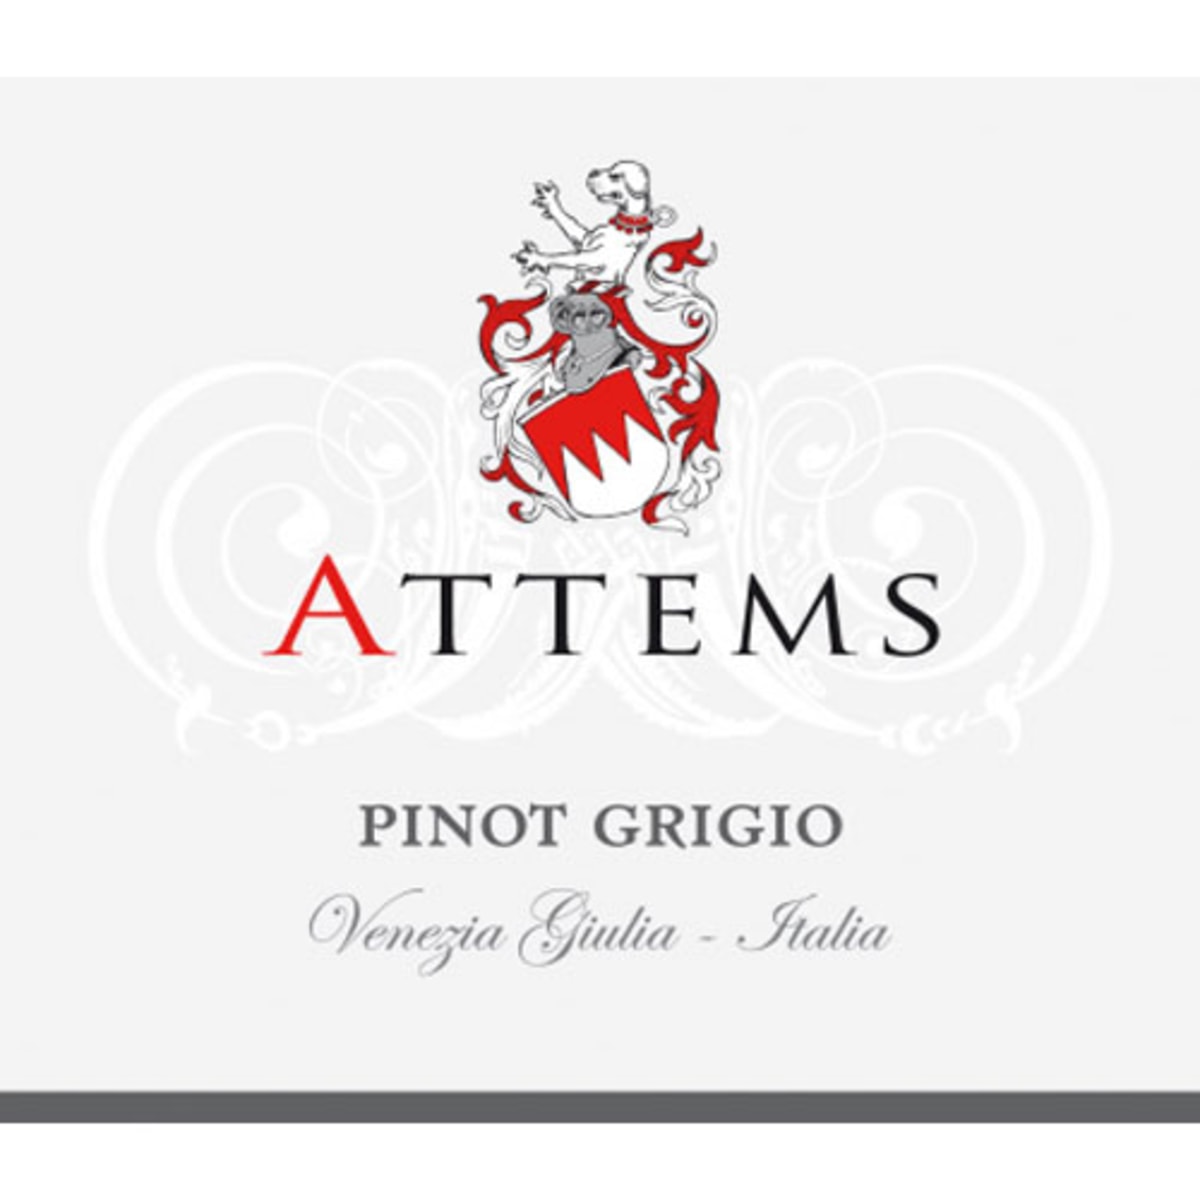 Attems Pinot Grigio 2014 Front Label